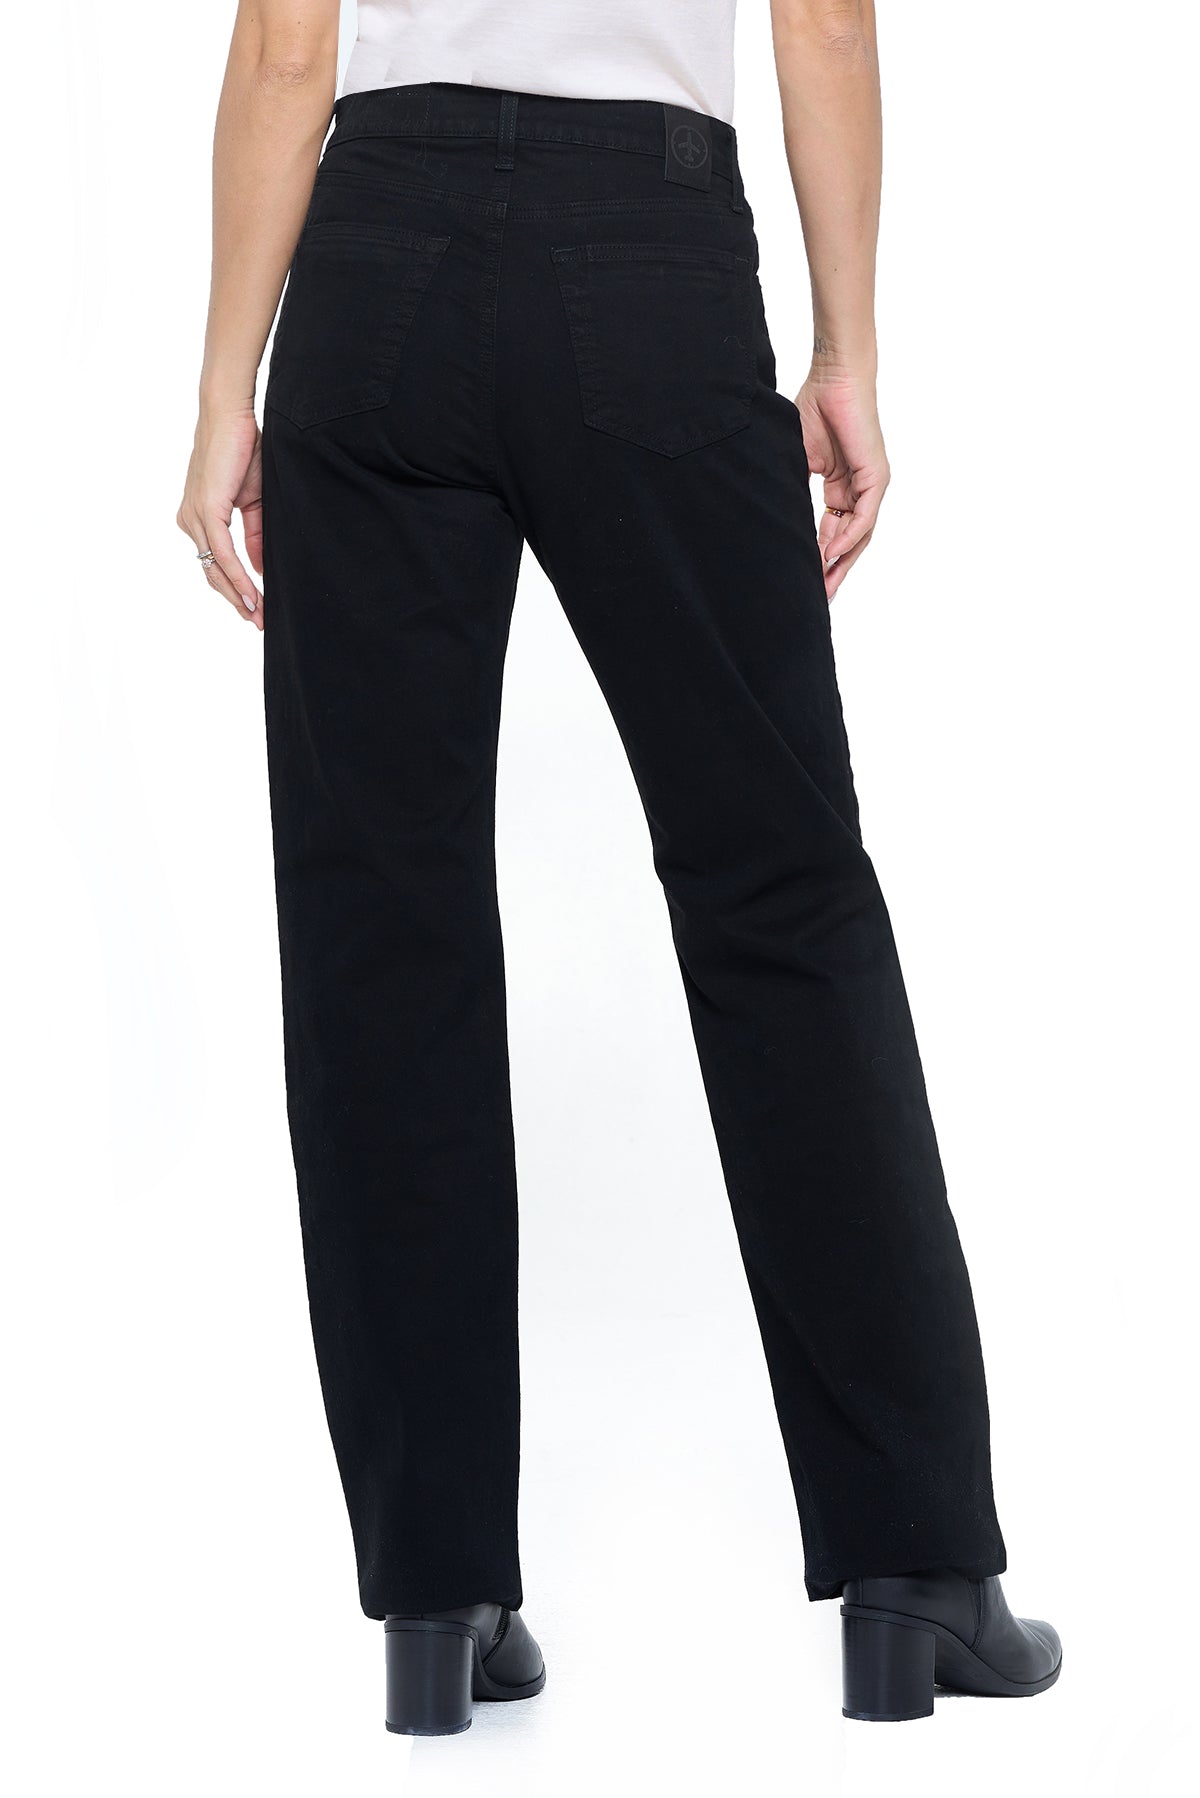 Buy Ultimate Utility: Women's 6-Pocket Jeans for Fashion and Function (26,  Black) at